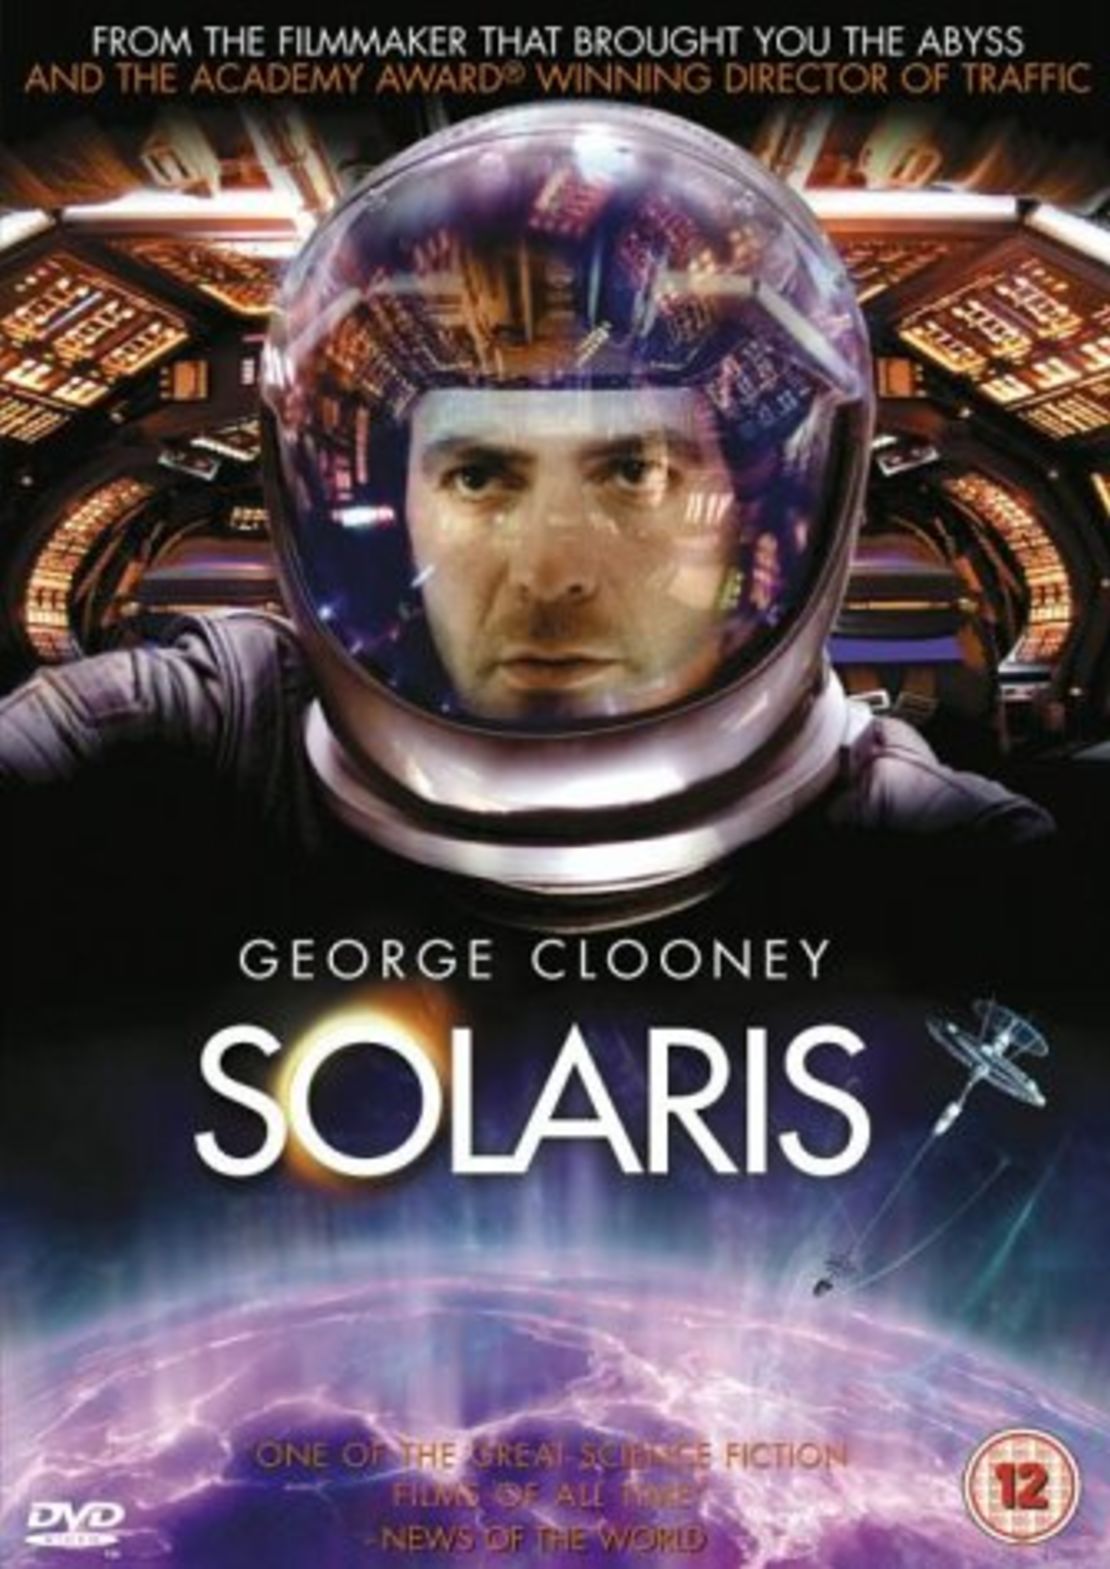 George Clooney starred in "Solaris" a 2002 film version of Lem's novel.